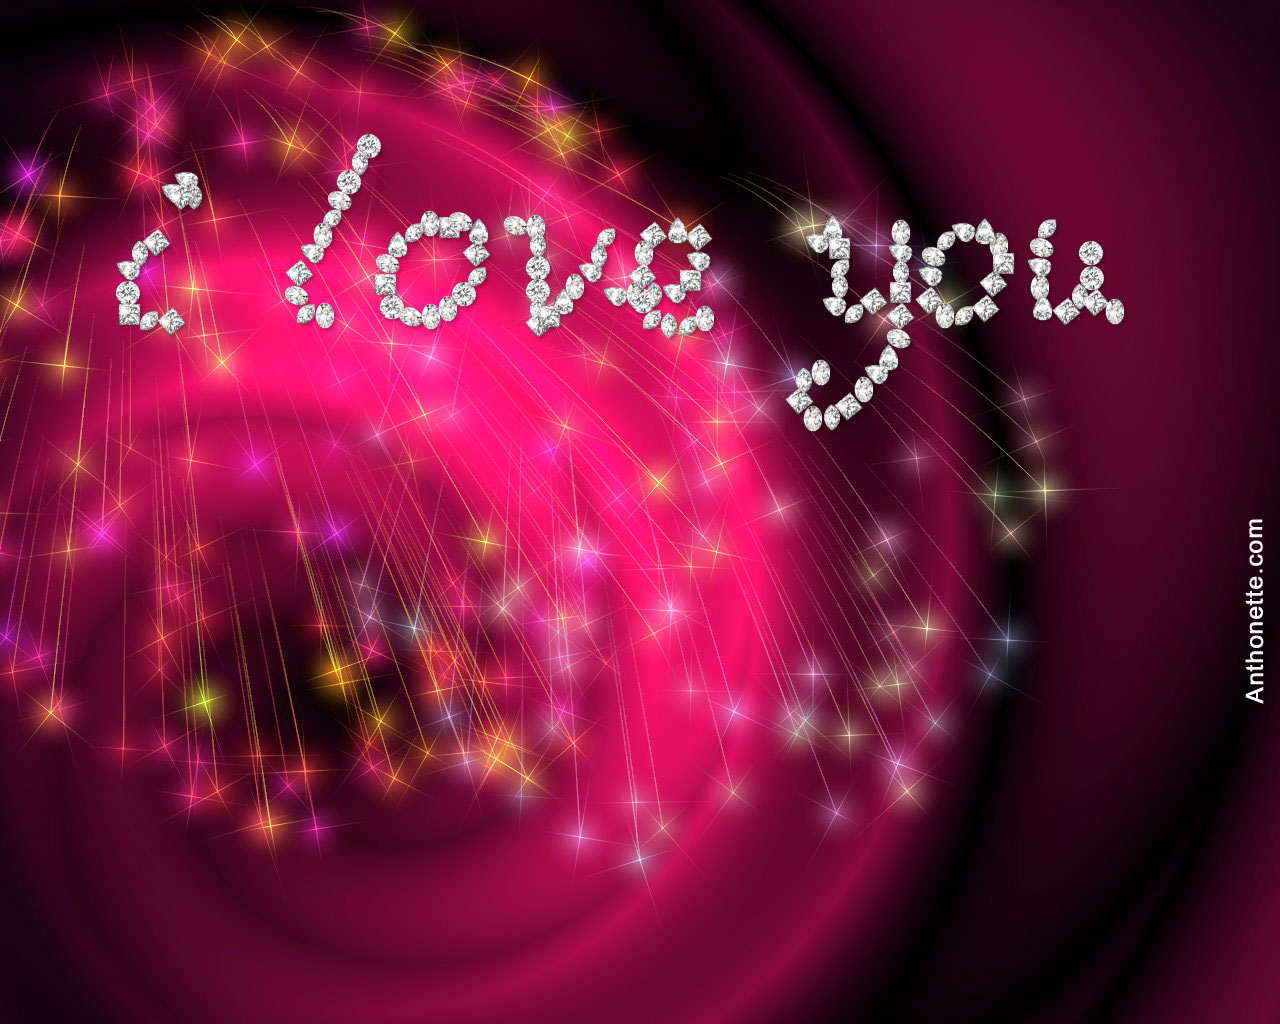 I Love You Wallpapers HD Wallpapers Pulse